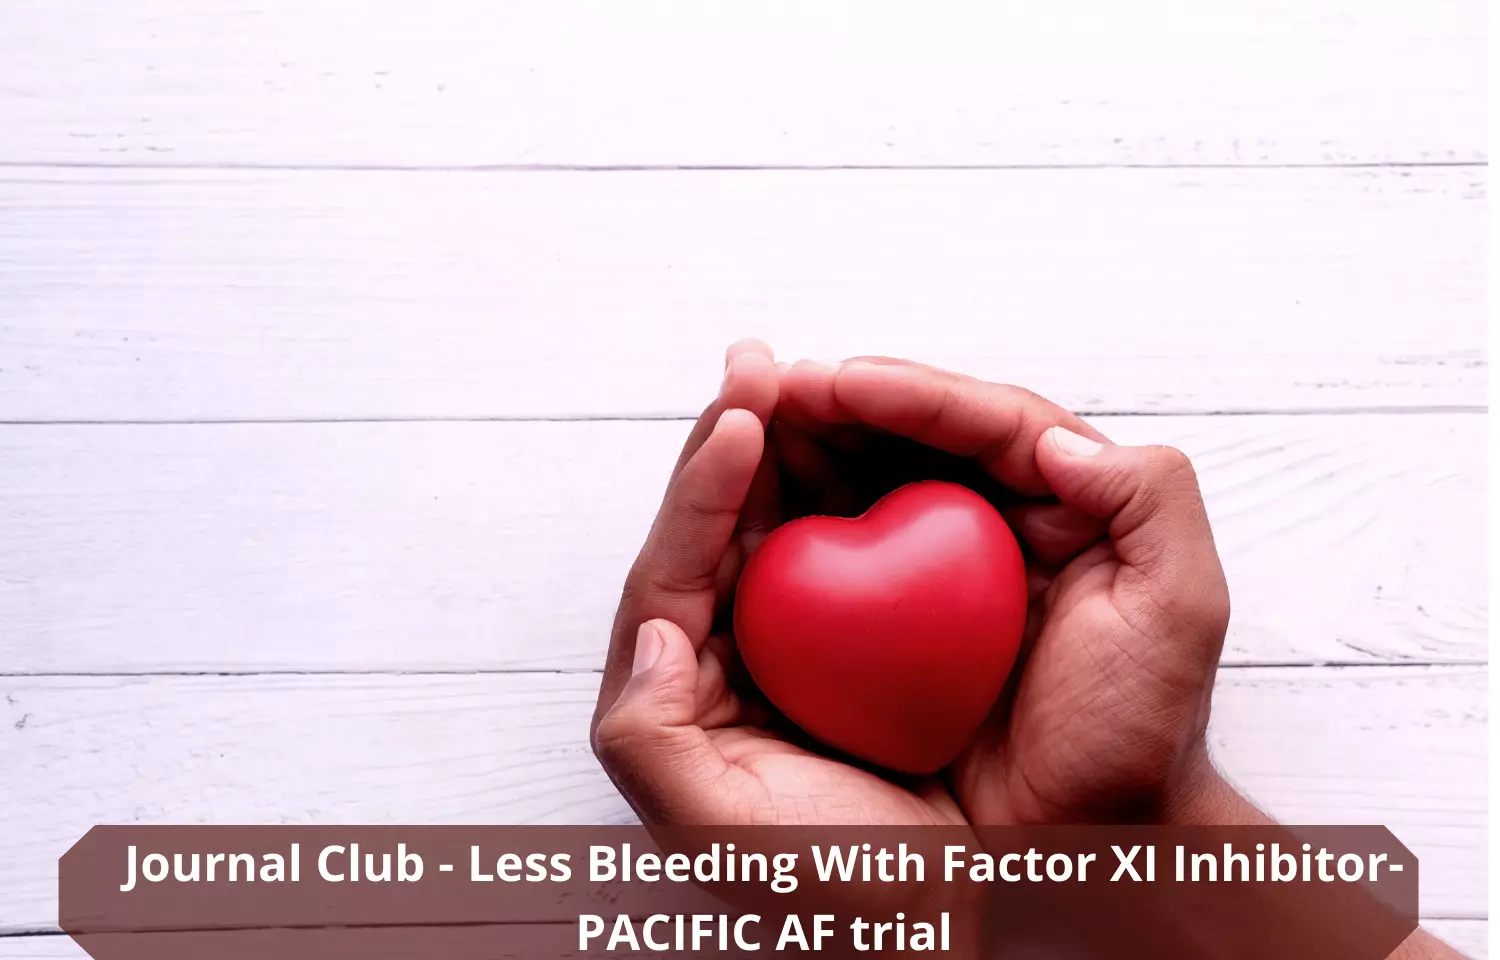 Journal Club - Less Bleeding With Factor XI Inhibitor finds PACIFIC AF trial